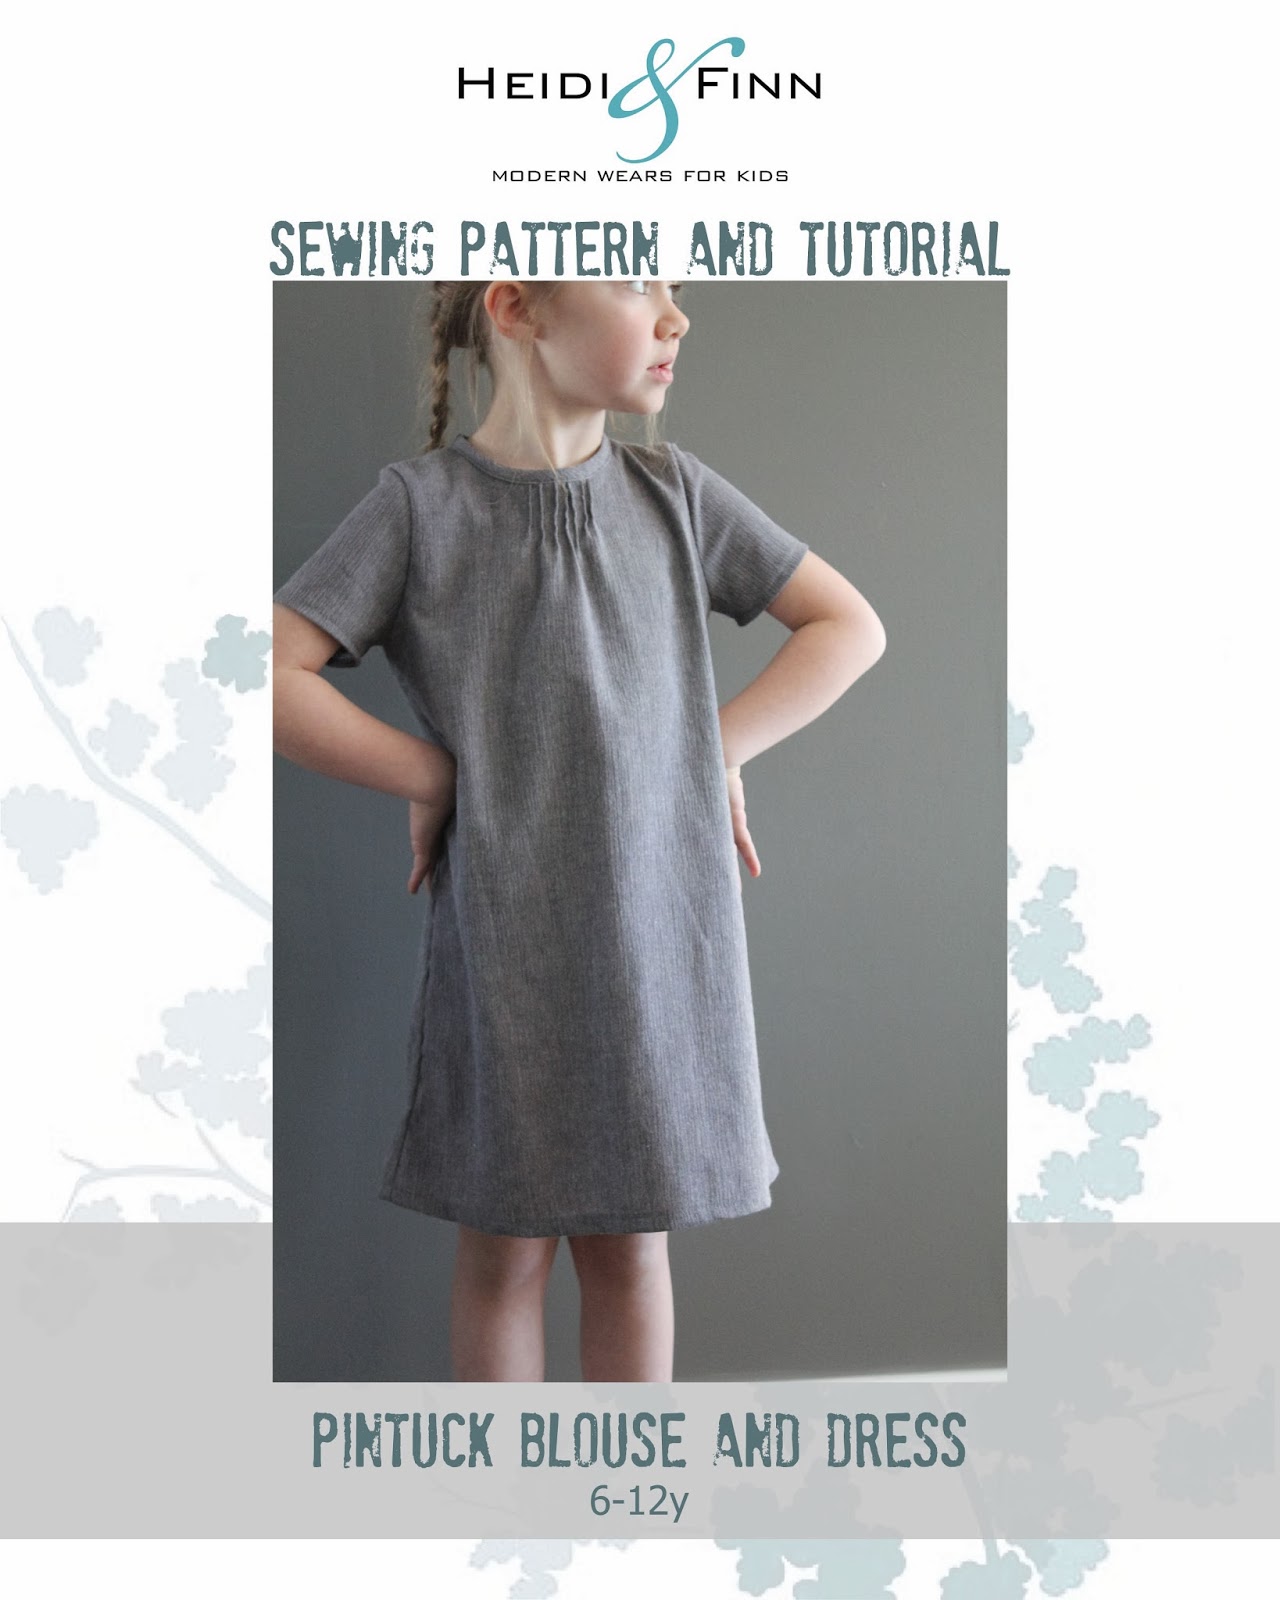 https://www.etsy.com/listing/181318141/pintuck-blouse-and-dress-pdf-pattern-and?ref=listing-shop-header-1